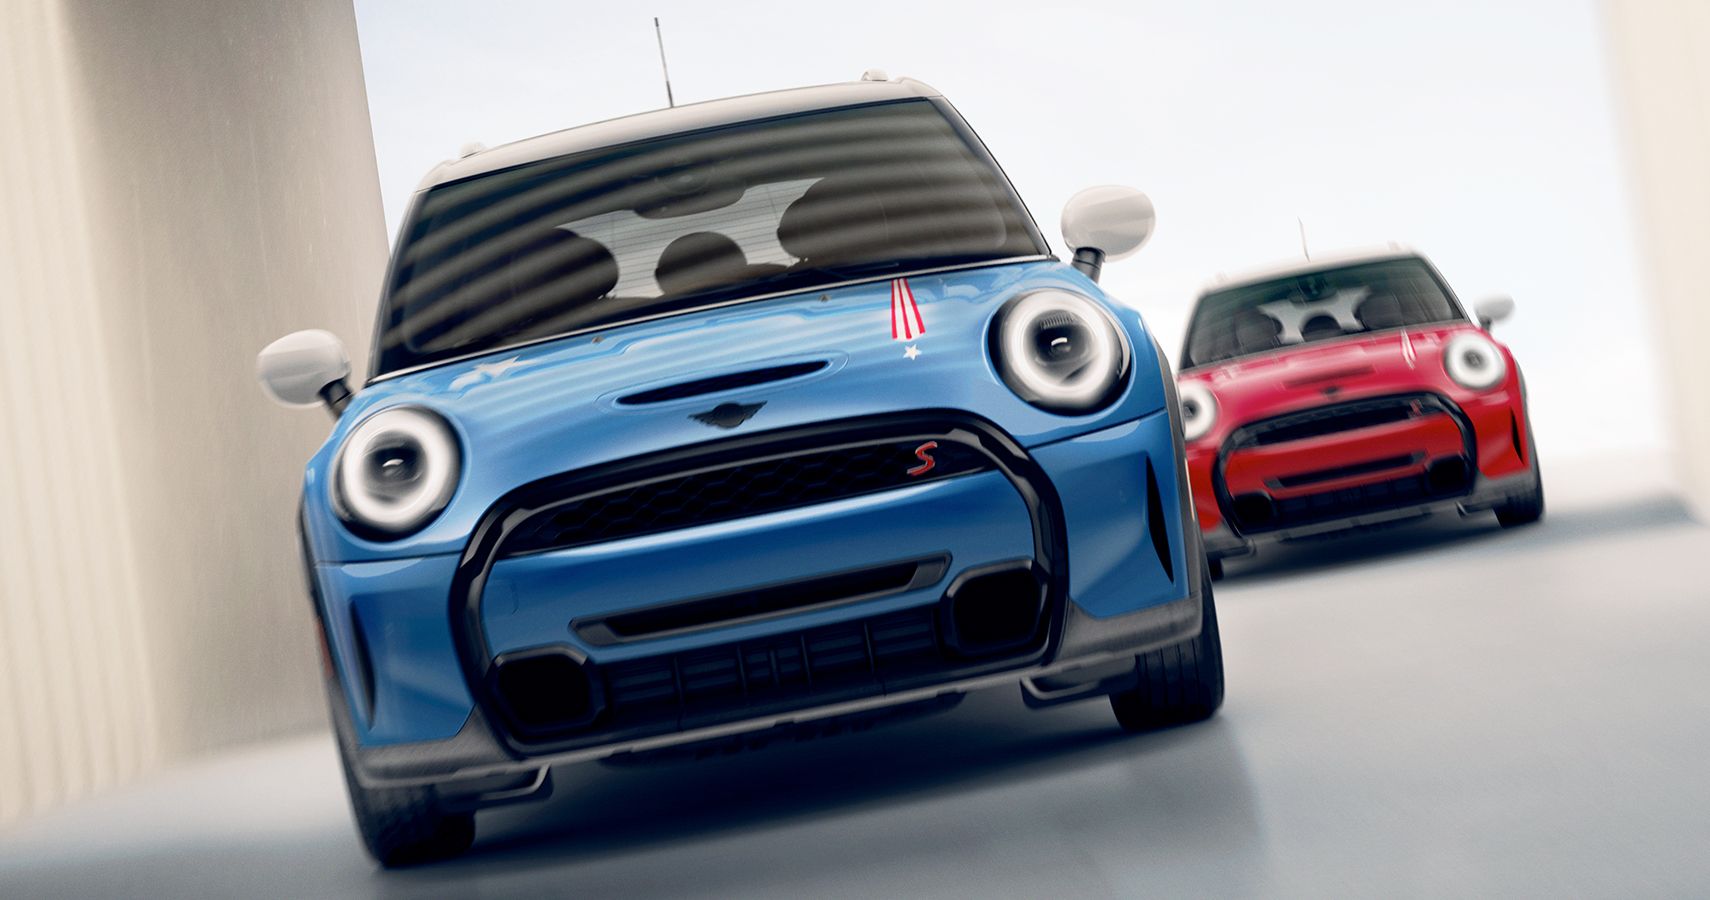 Mini Celebrates 20 Years In The U.S. With These Awesome Cooper S Special Editions